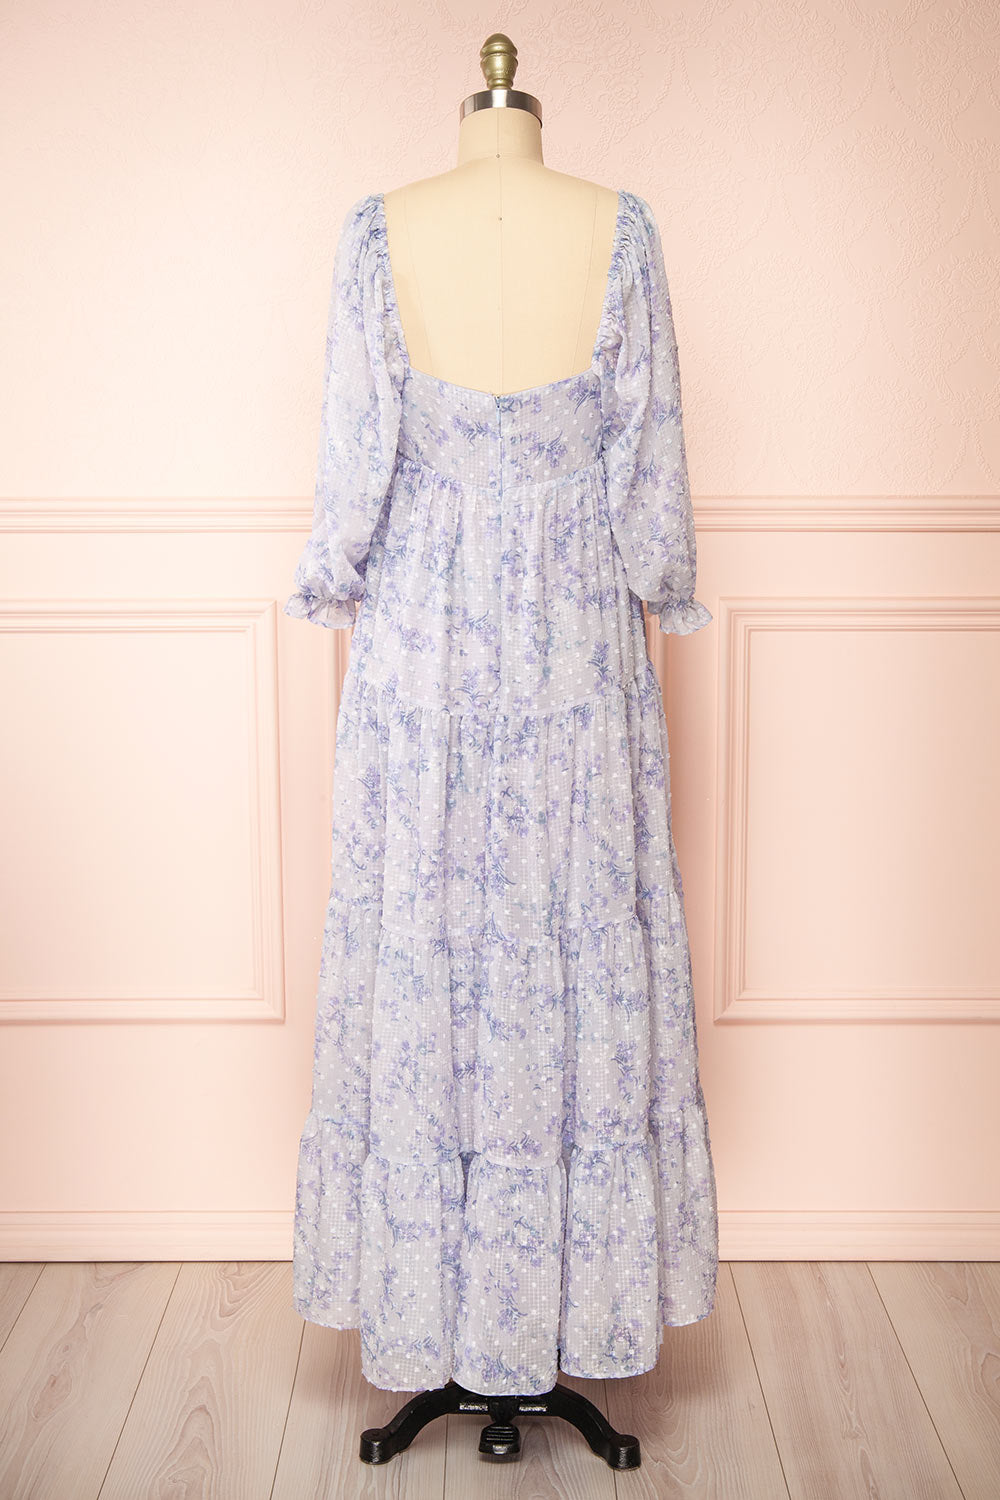 Lukka Tiered Floral Maxi Dress w/ Puffy Sleeves | Boutique 1861 back view